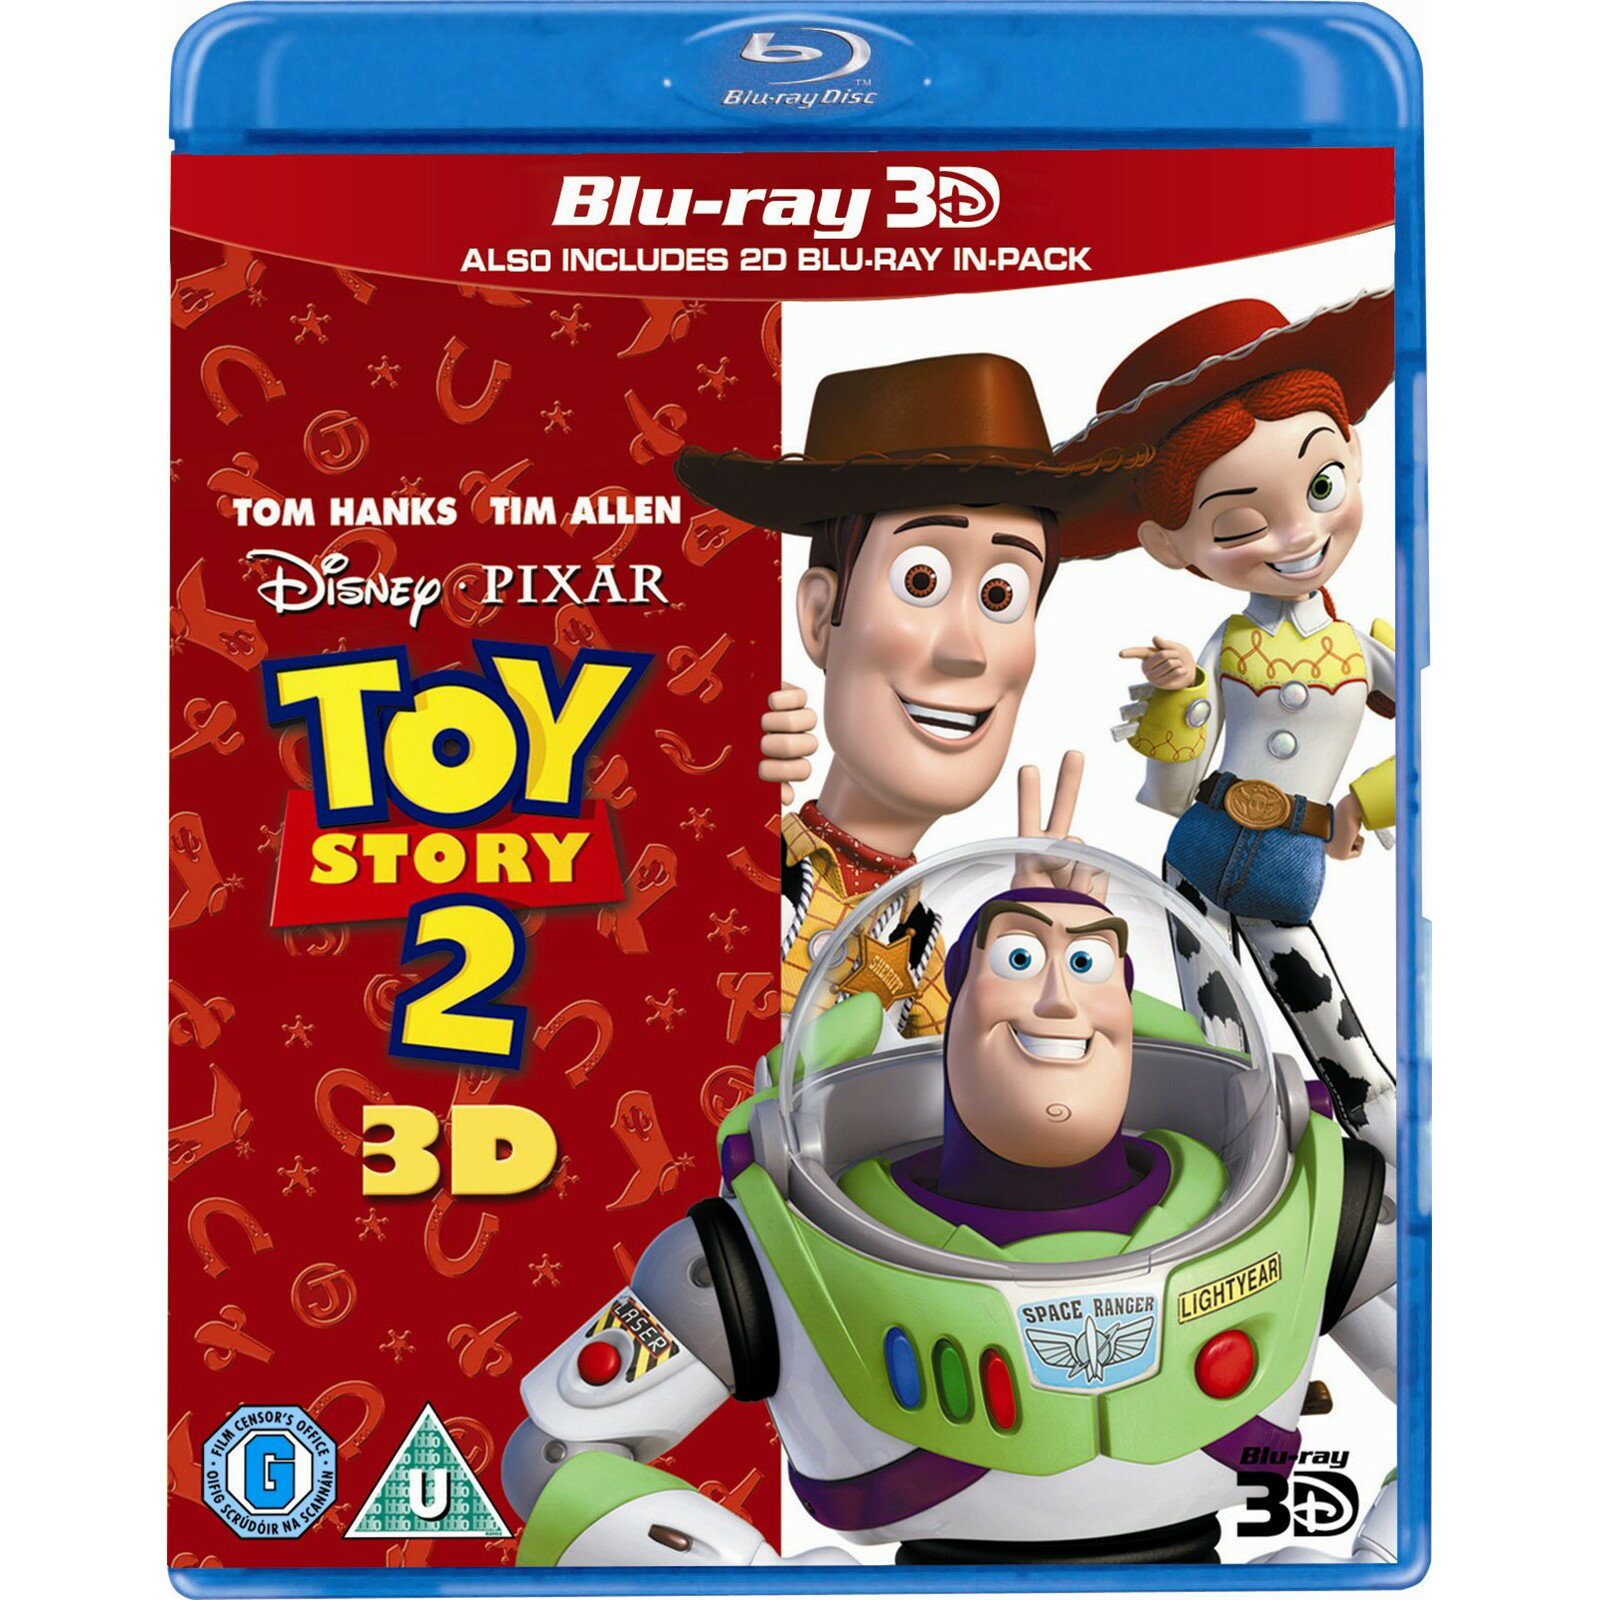 Toy Story 3 download the new version for apple